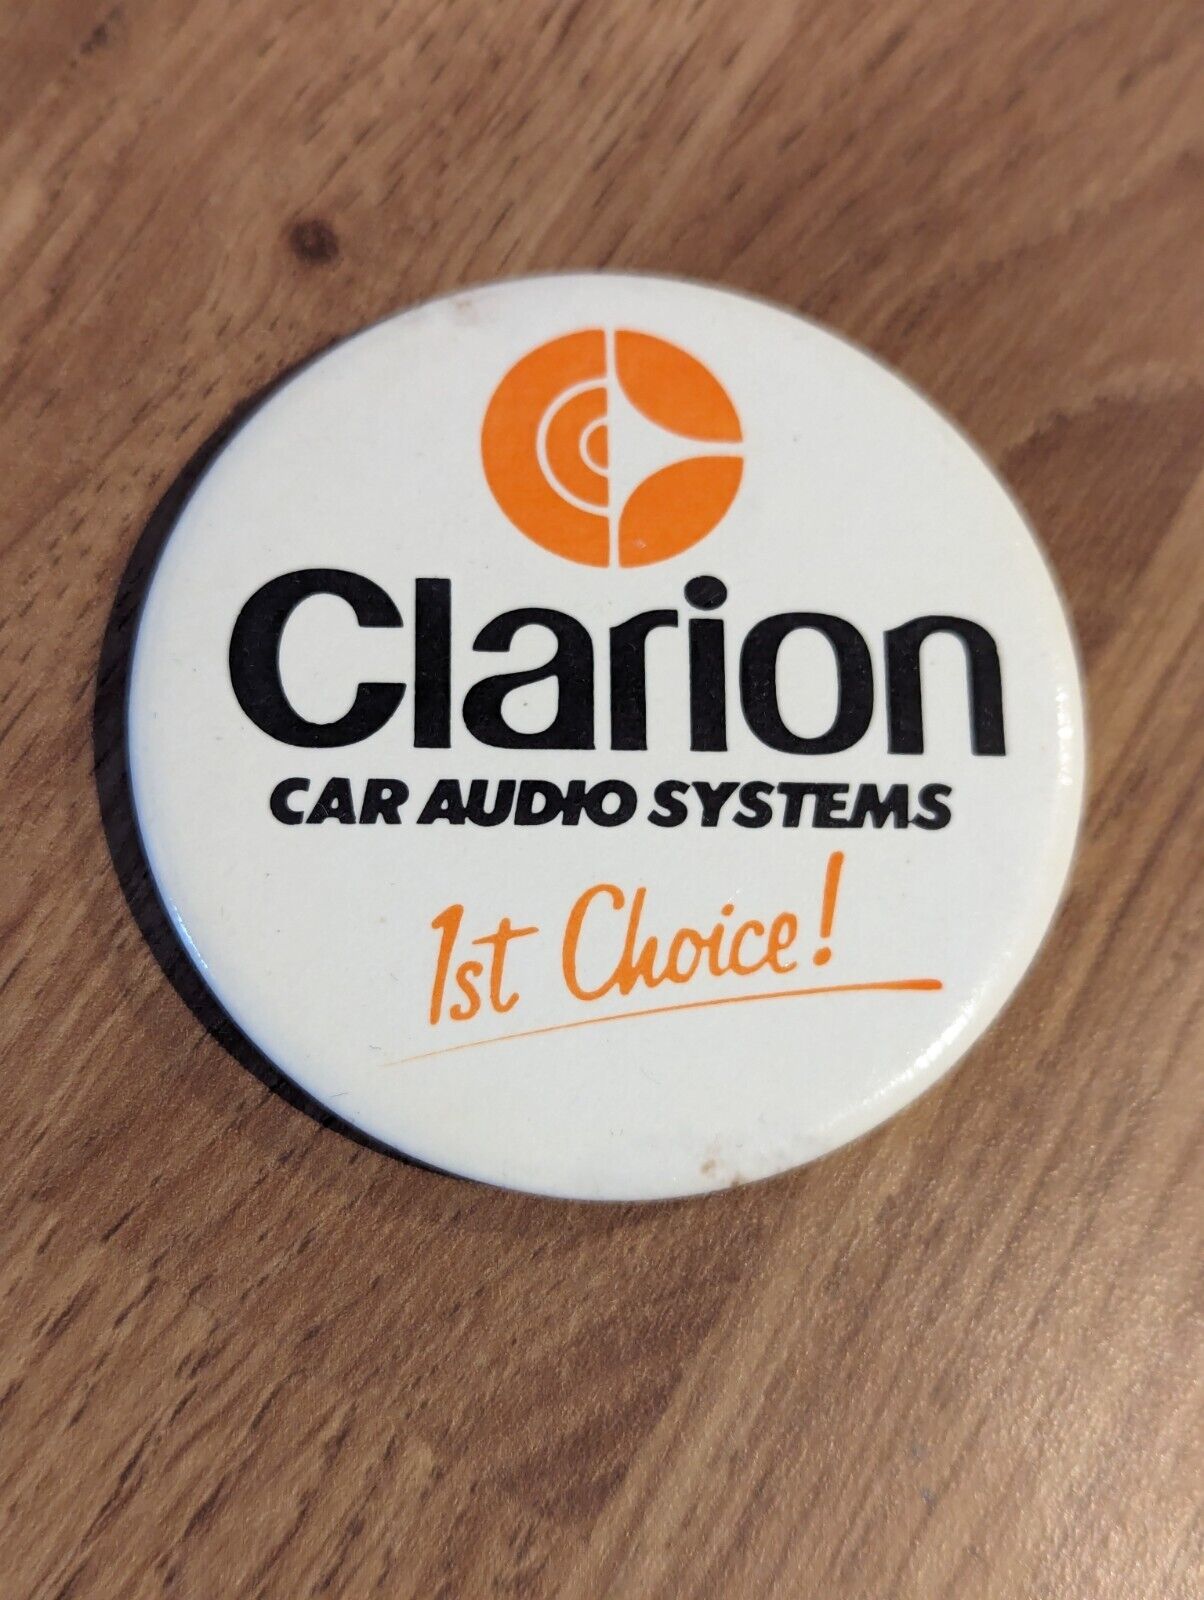 Clarion Car Audio Systems Vintage Pin Badge